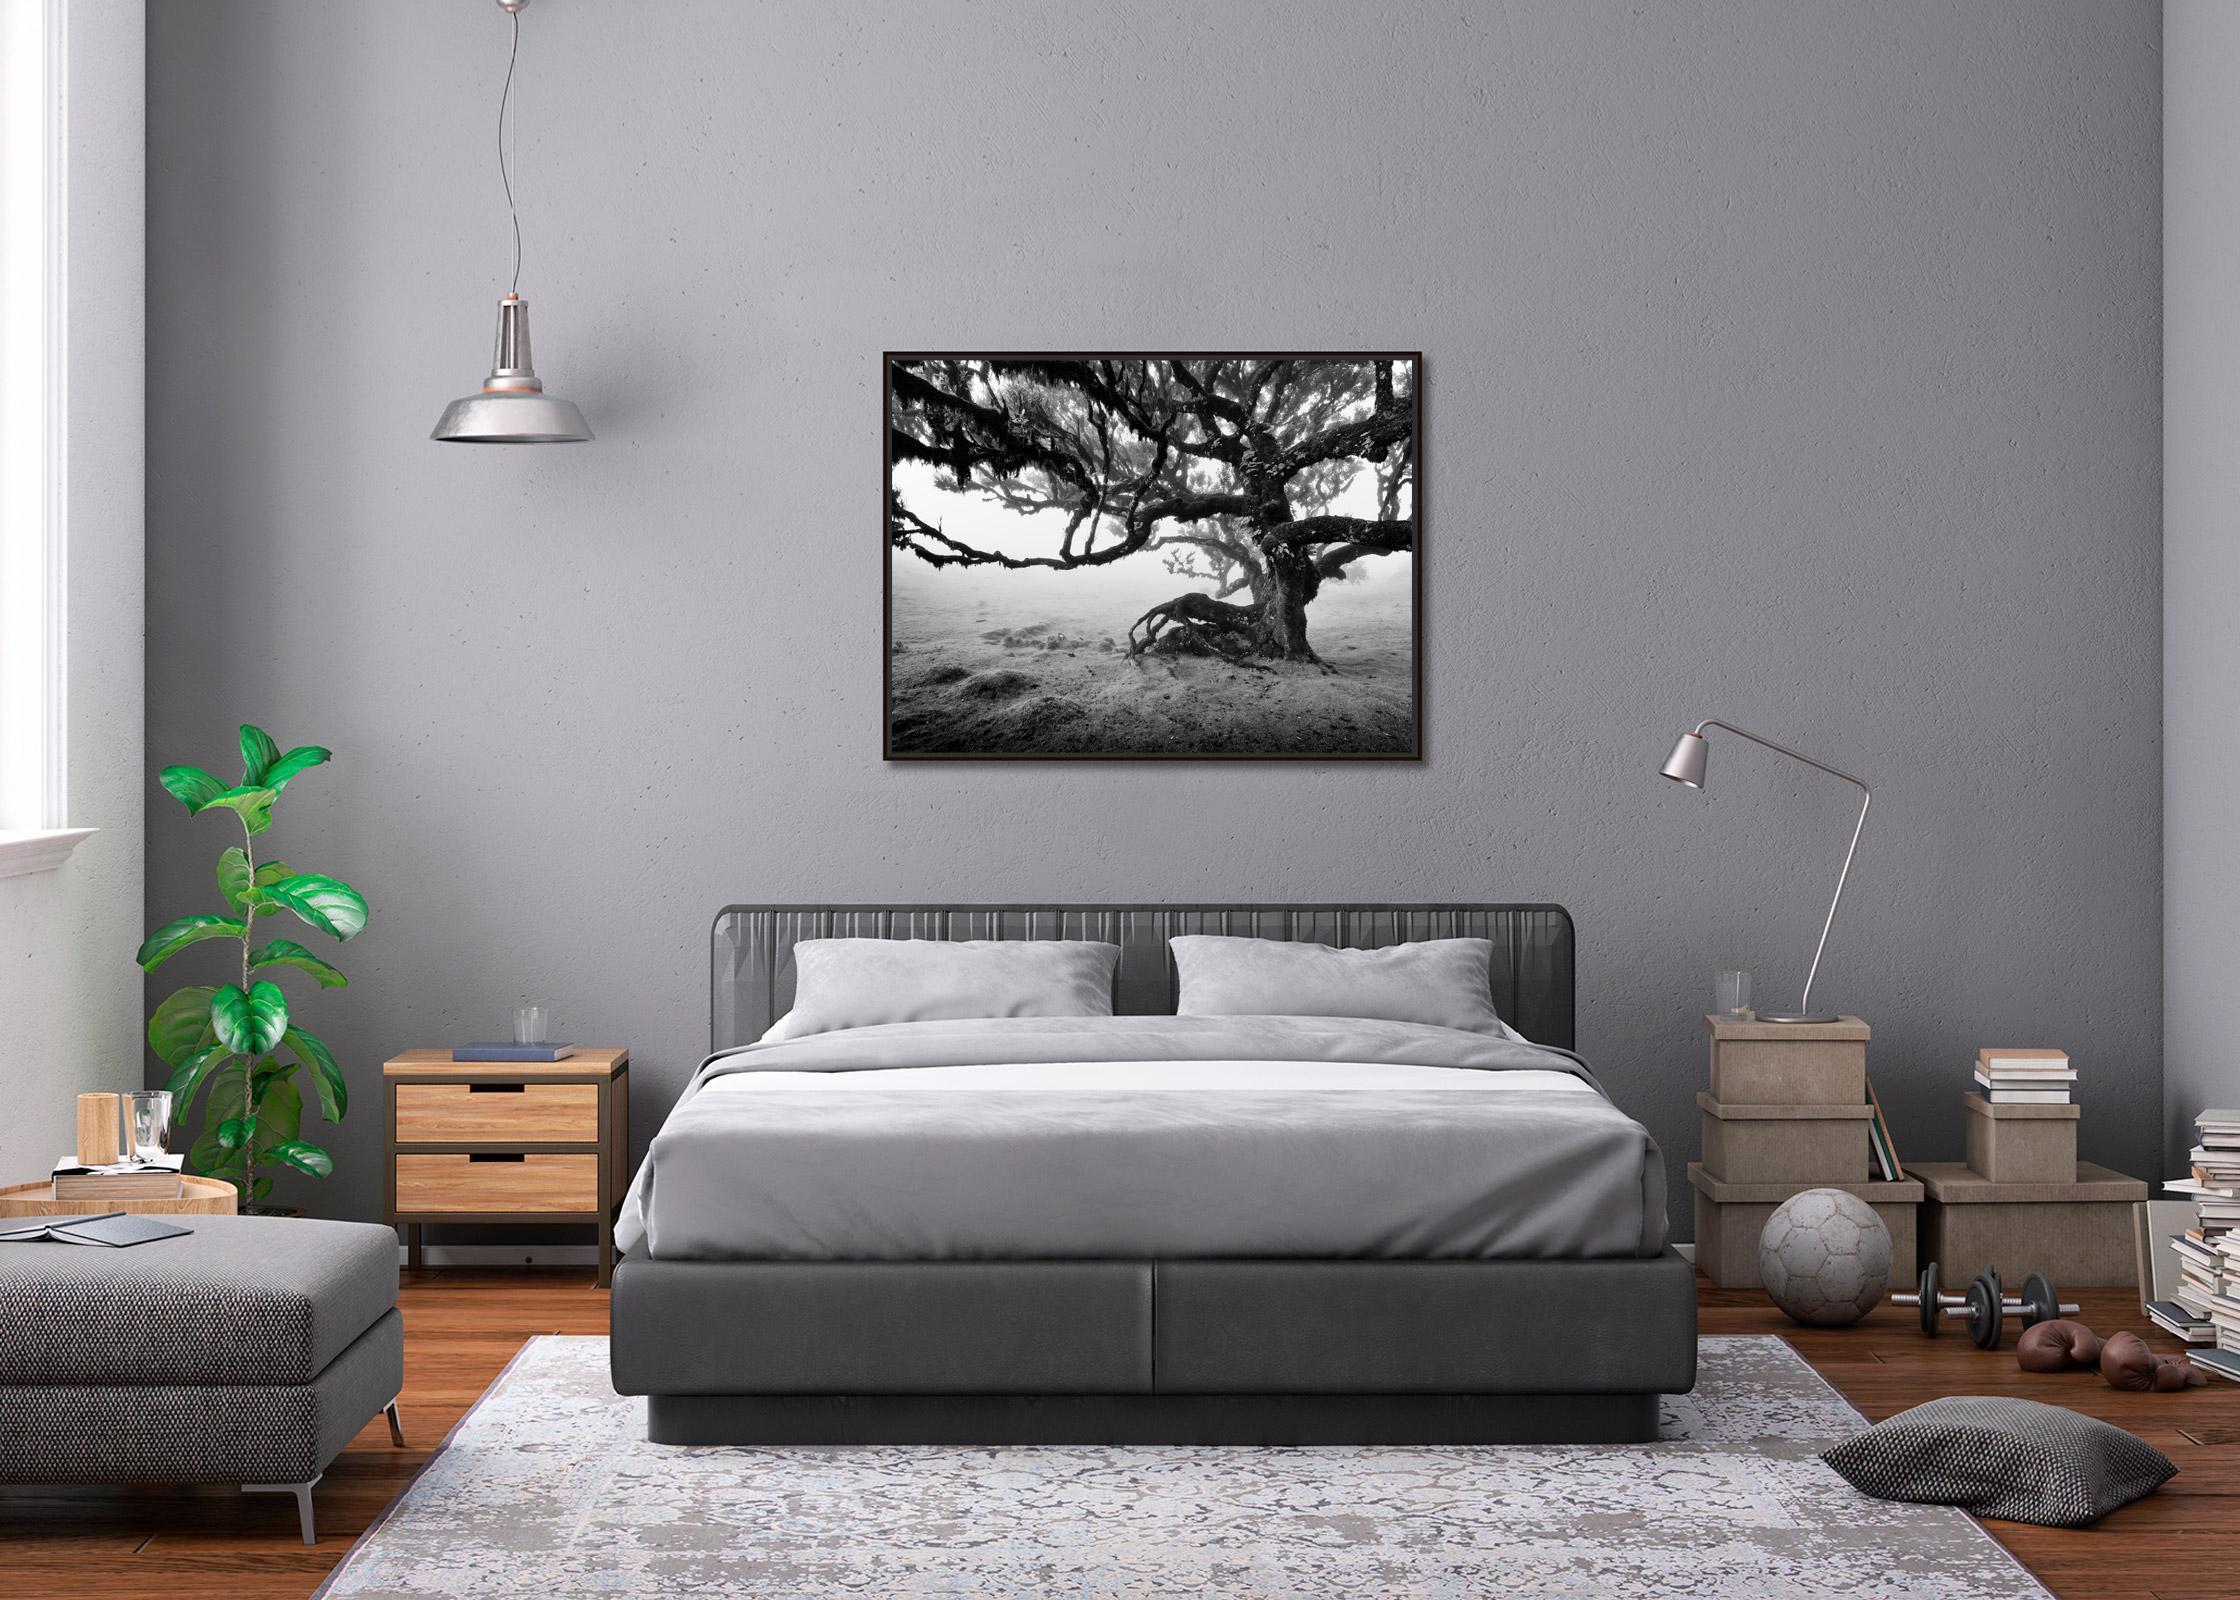 Black and white fine art landscape photography print. Laurel tree in the Fanal forest on Madeira Island, Portugal. Archival pigment ink print, edition of 5. Signed, titled, dated and numbered by artist. Certificate of authenticity included. Printed